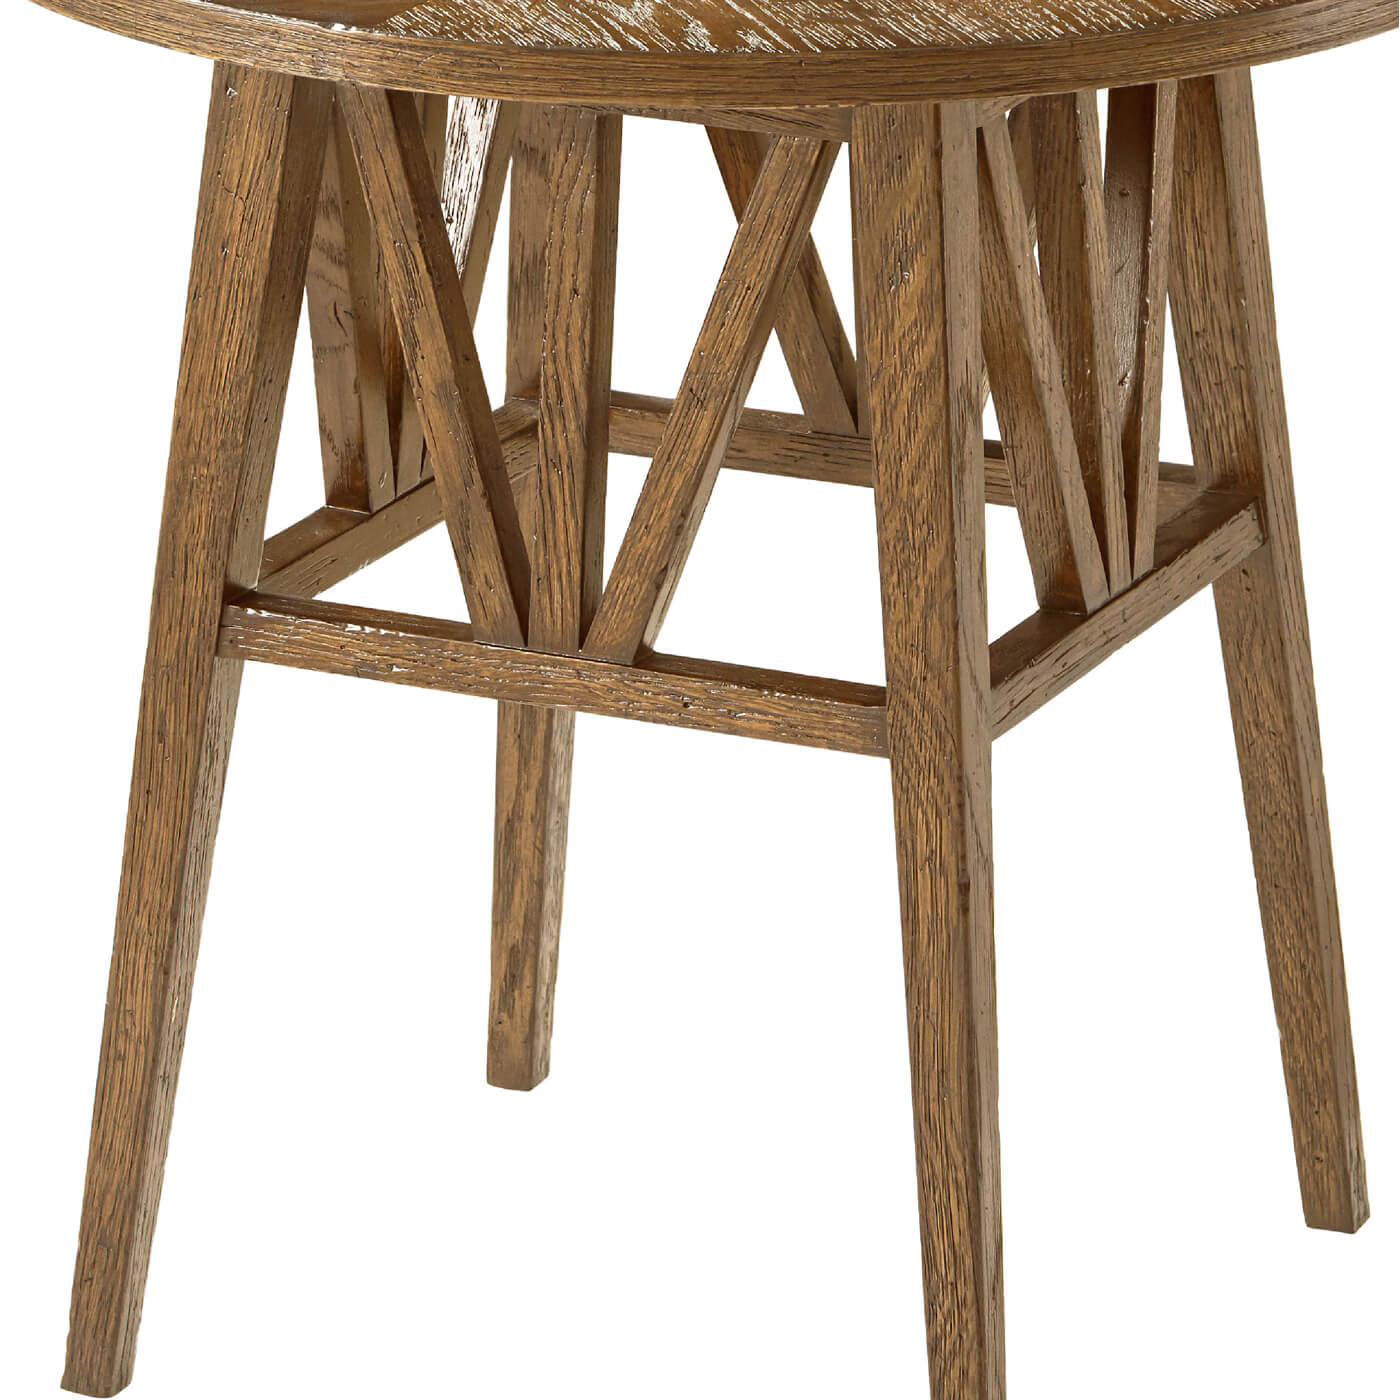 A light modern rustic oak round end table with a geometrically arranged oak pattern on the round top. It is crafted with a flat truss oak stretcher and tapered oak leg. 
Dawn finish
Dimensions
22